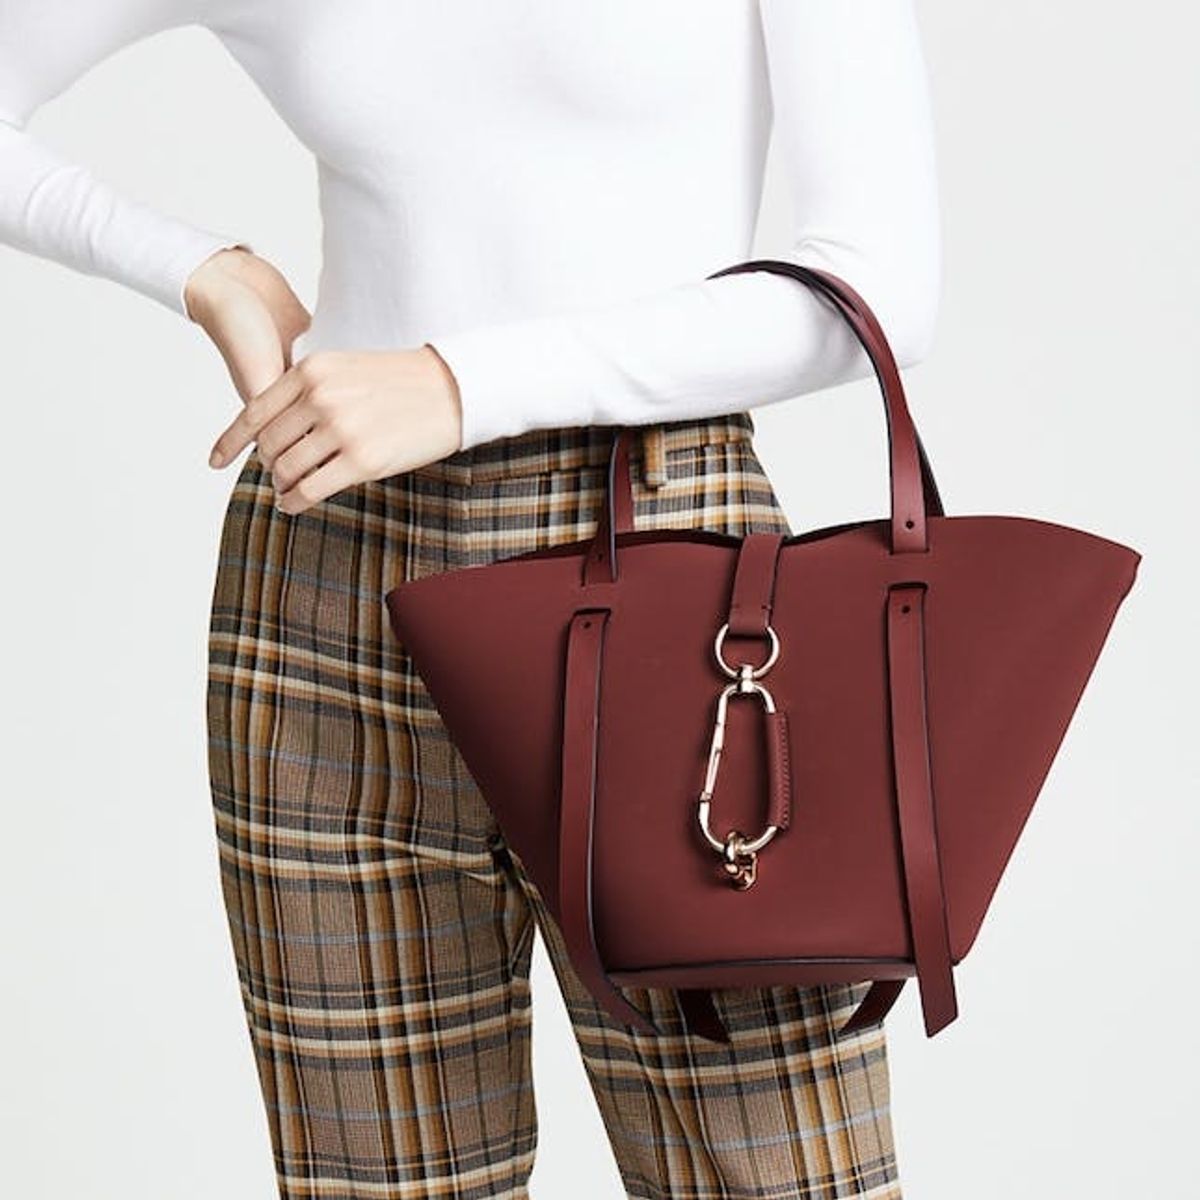 10 Fall Bags to Carry to Job Interviews (and Once You Land the Gig)